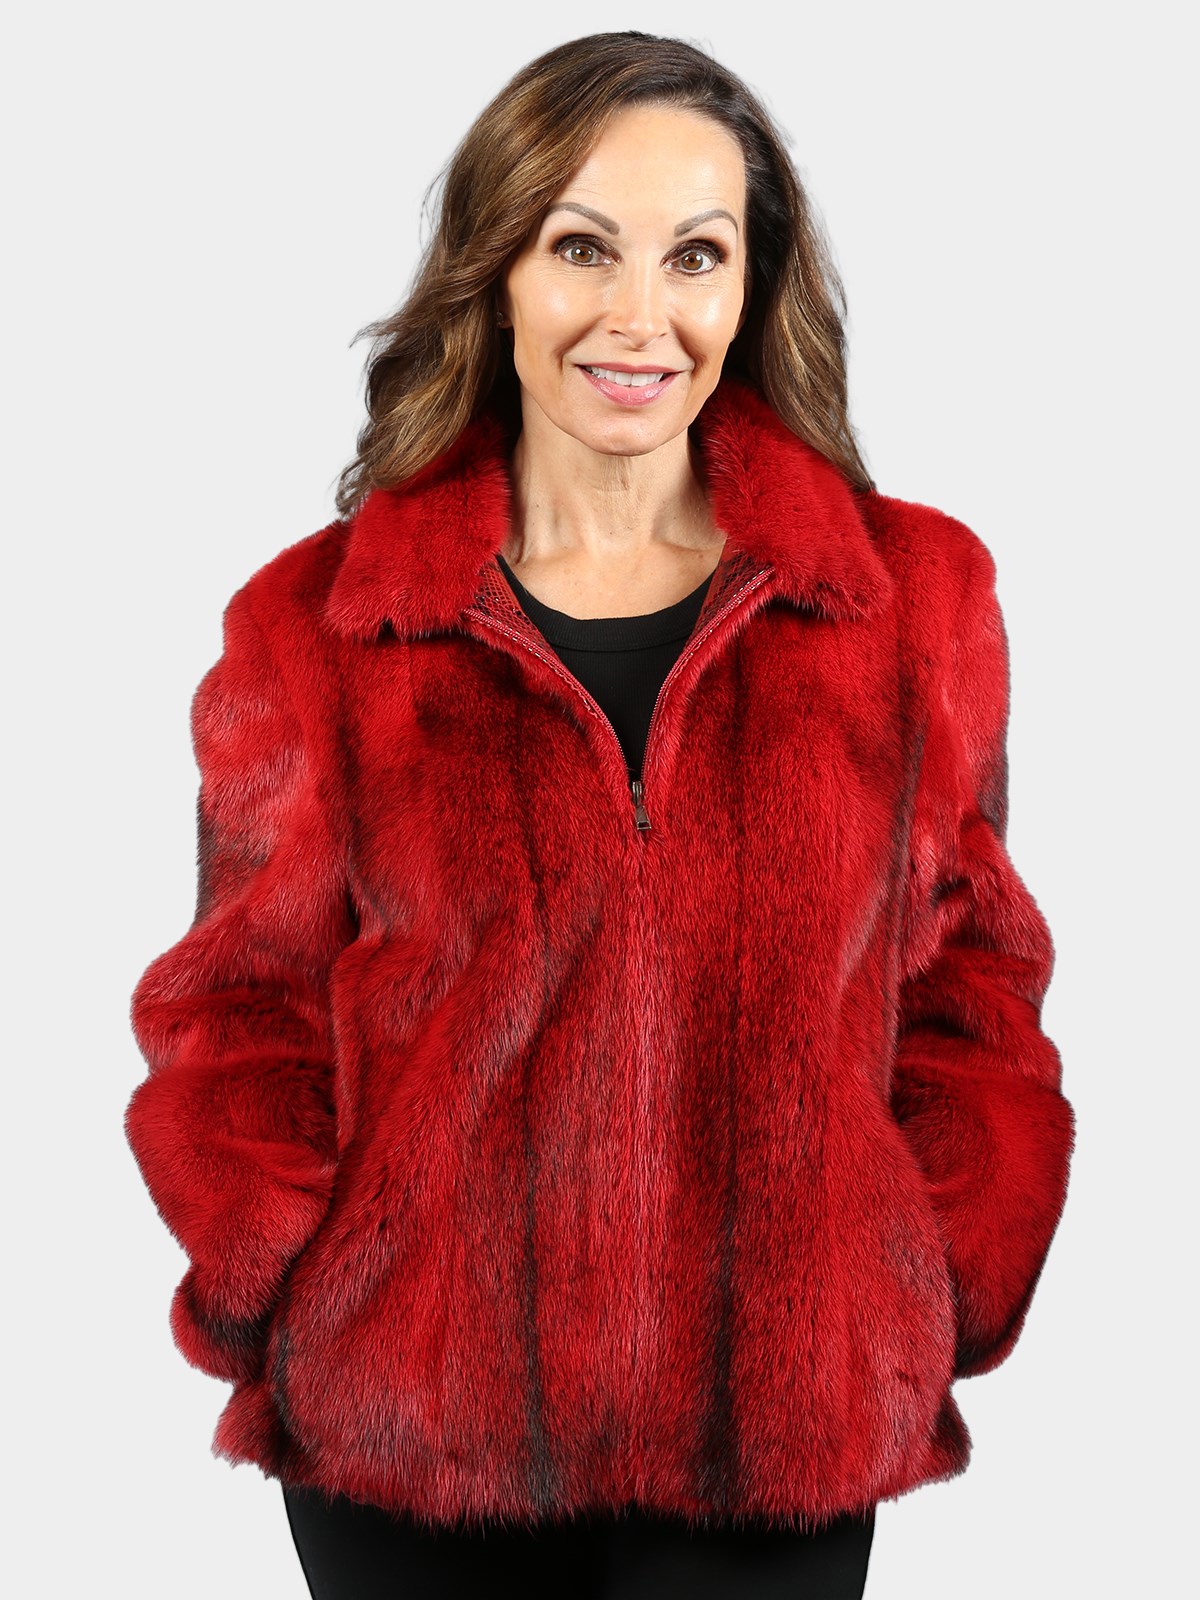 Woman's Dyed Red Female Mink Fur Jacket Reversible to Stenciled Leather